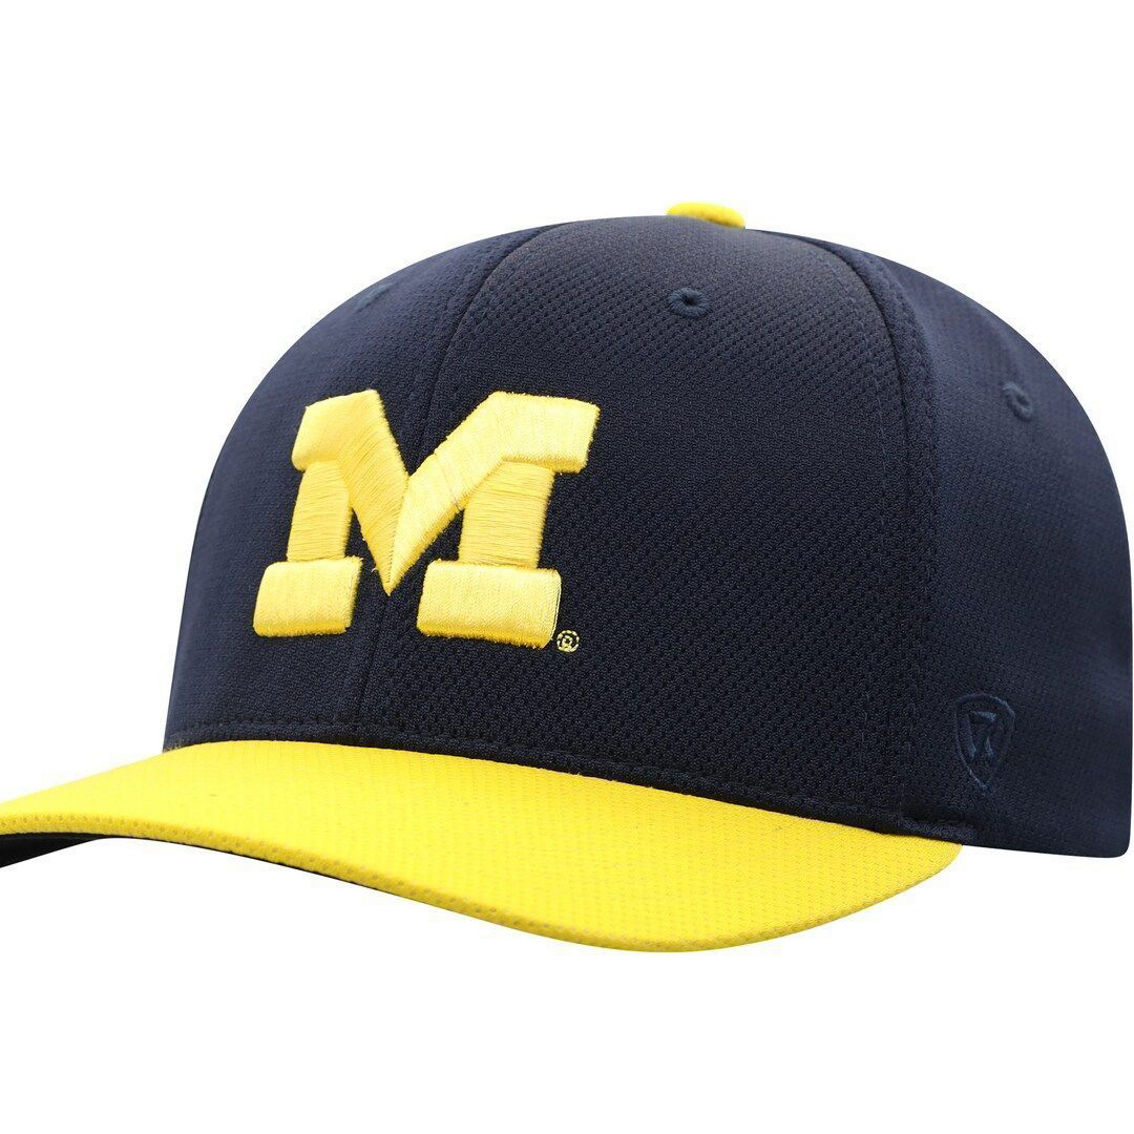 Top of the World Men's Navy/Maize Michigan Wolverines Two-Tone Reflex Hybrid Tech Flex Hat - Image 4 of 4